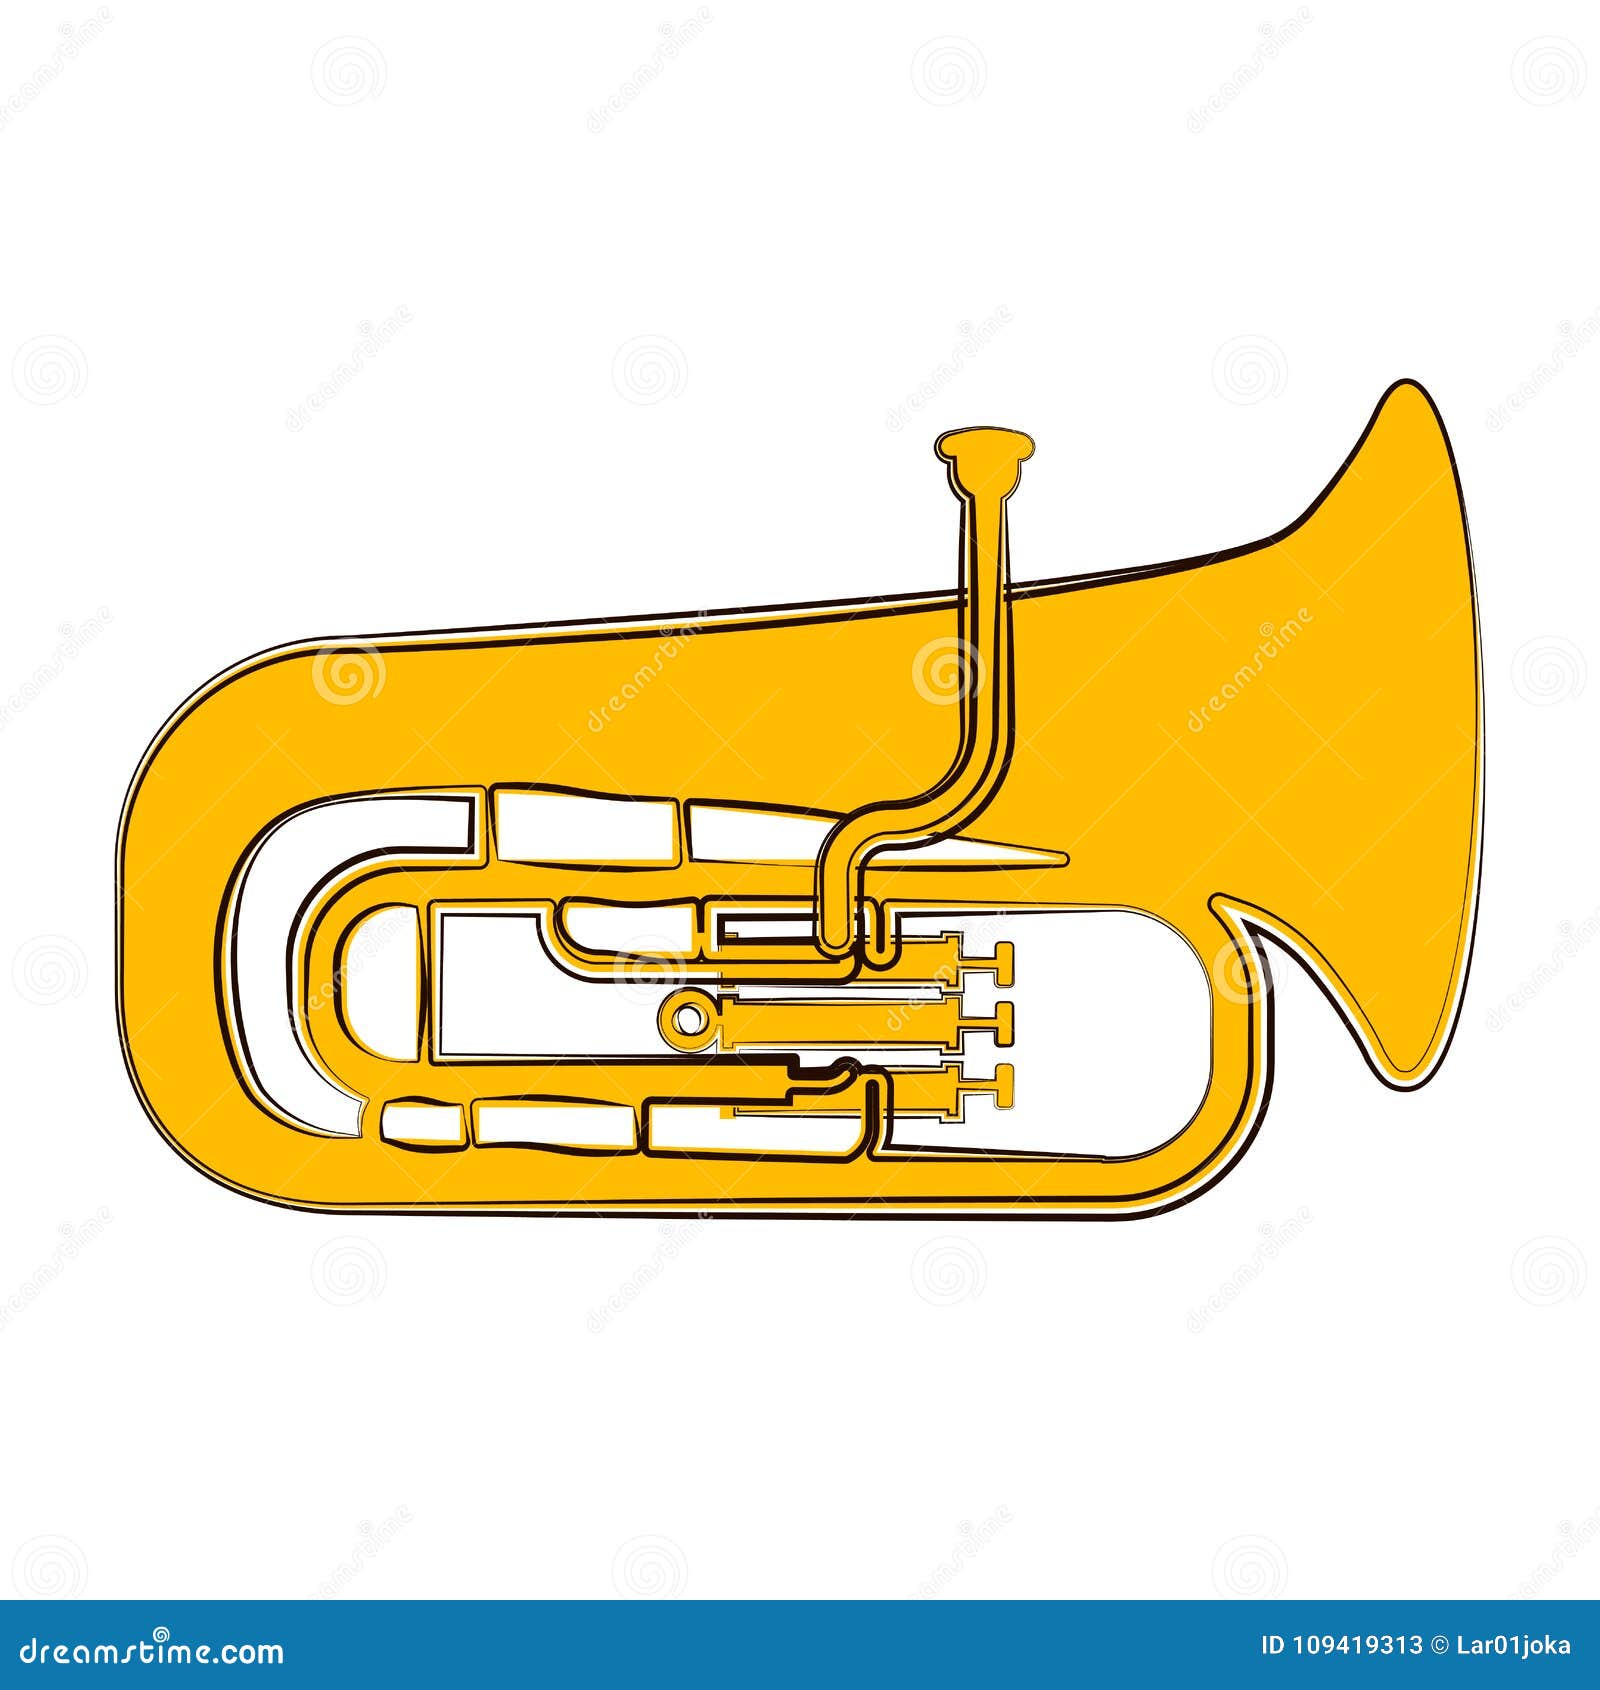 Isolated Tuba Sketch. Musical Instrument Stock Vector - Illustration of